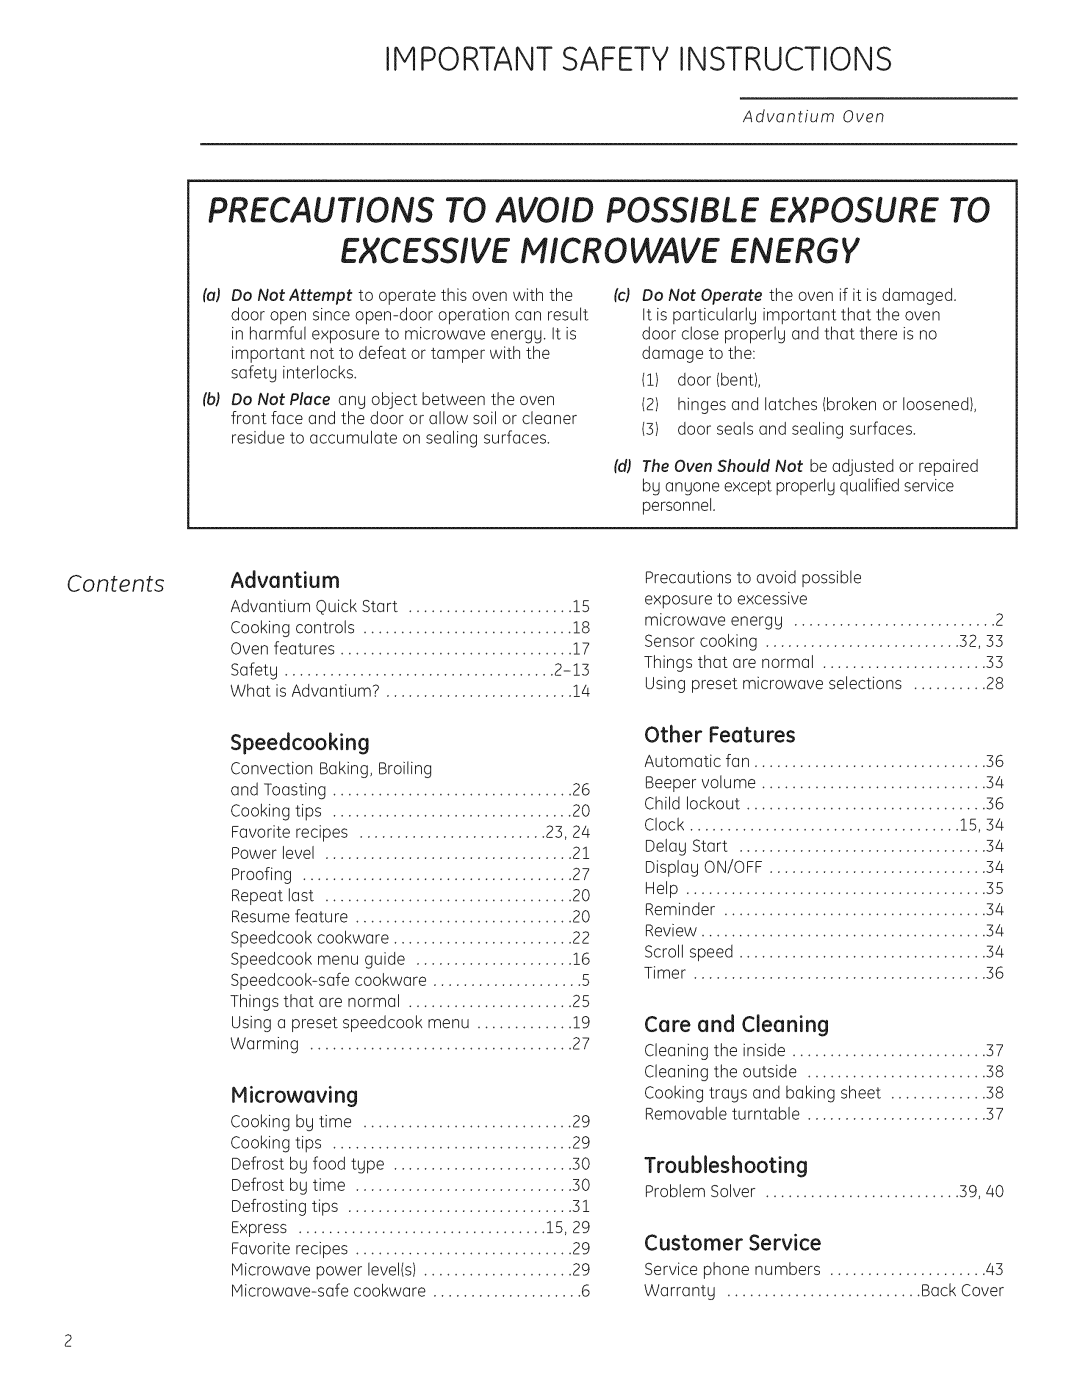 GE Monogram ZSC1202 Precautions To Avoid Possible Exposure To, Excessive Microwave Energy, Important Safety Instructions 